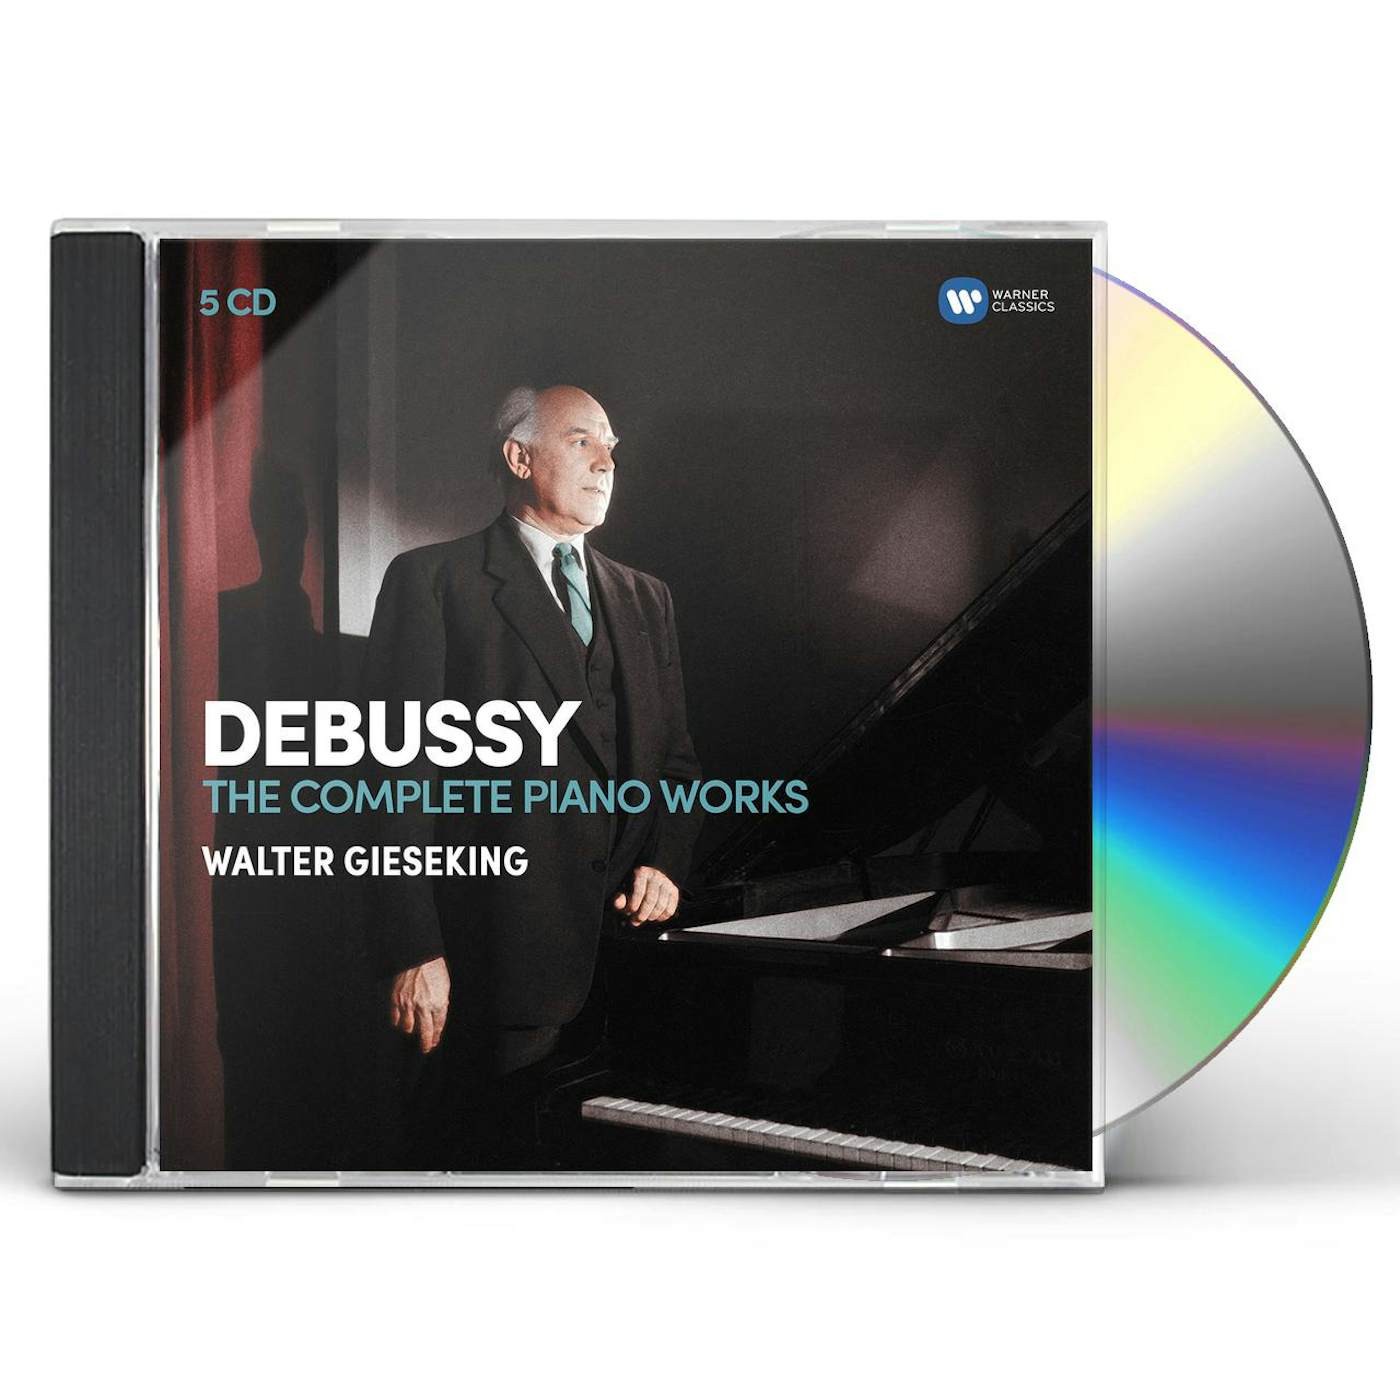 Walter Gieseking DEBUSSY: THE COMPLETE PIANO WORKS CD